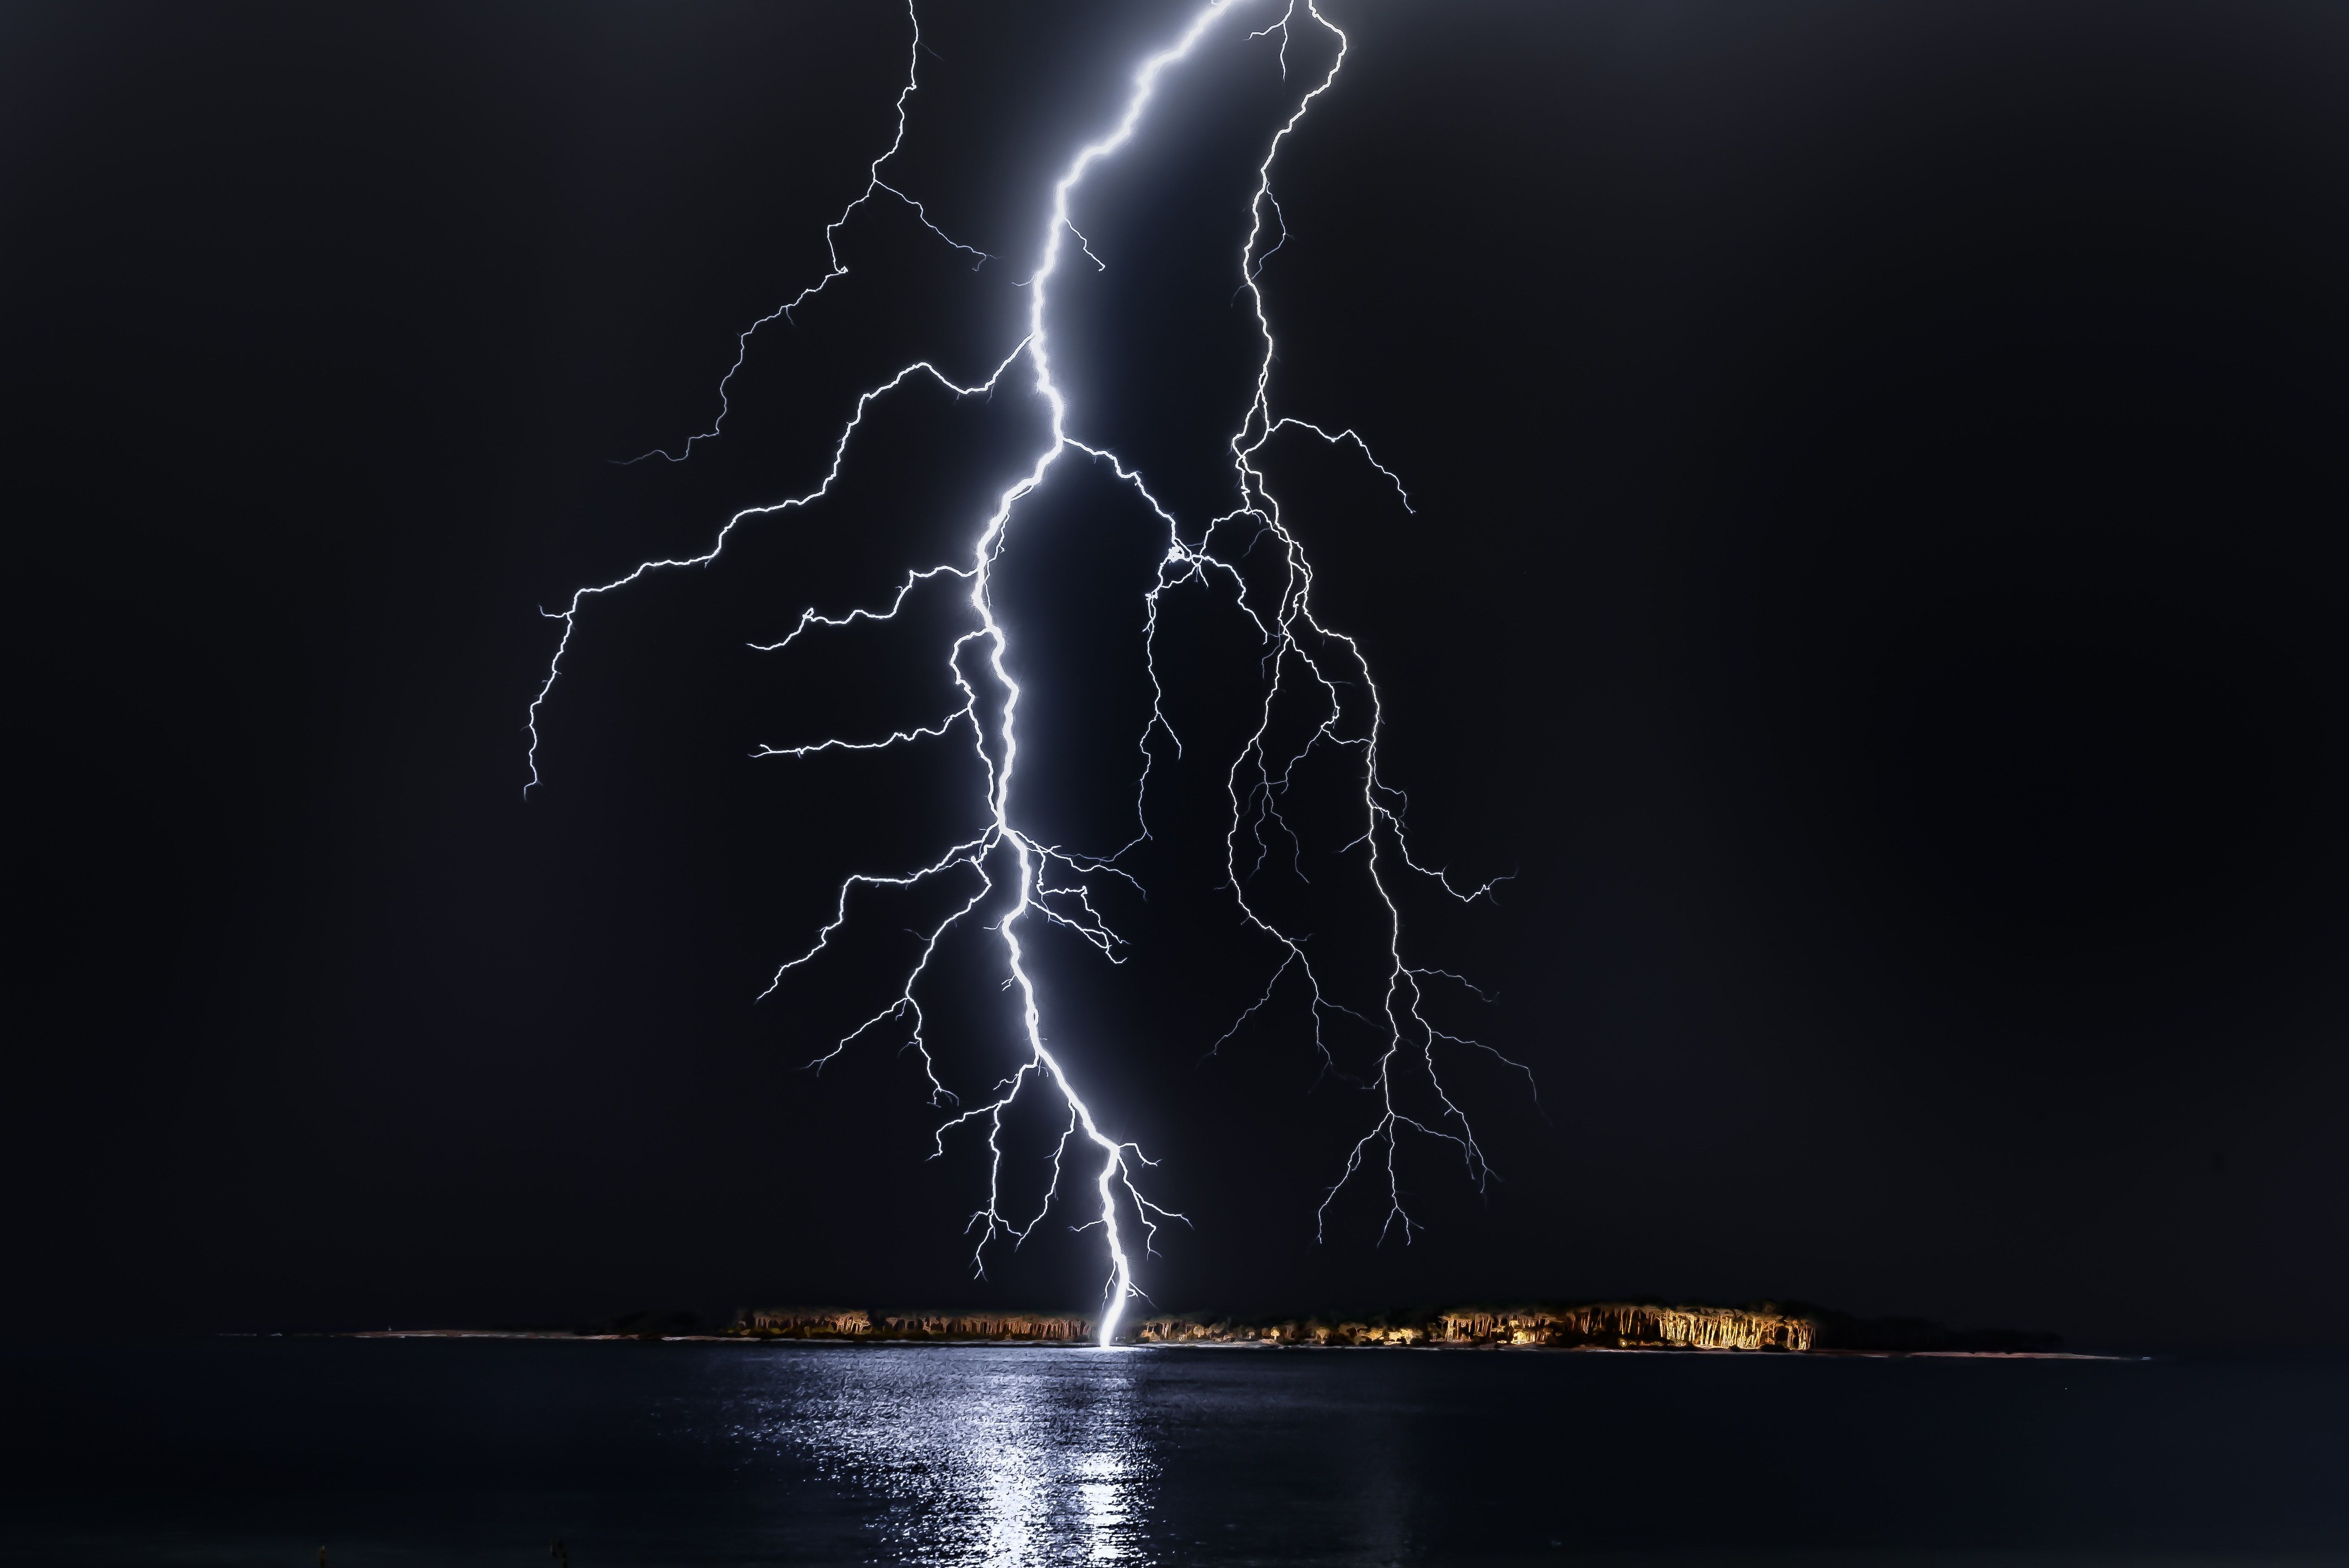 Lightning 4K wallpaper for your desktop or mobile screen free and easy to download